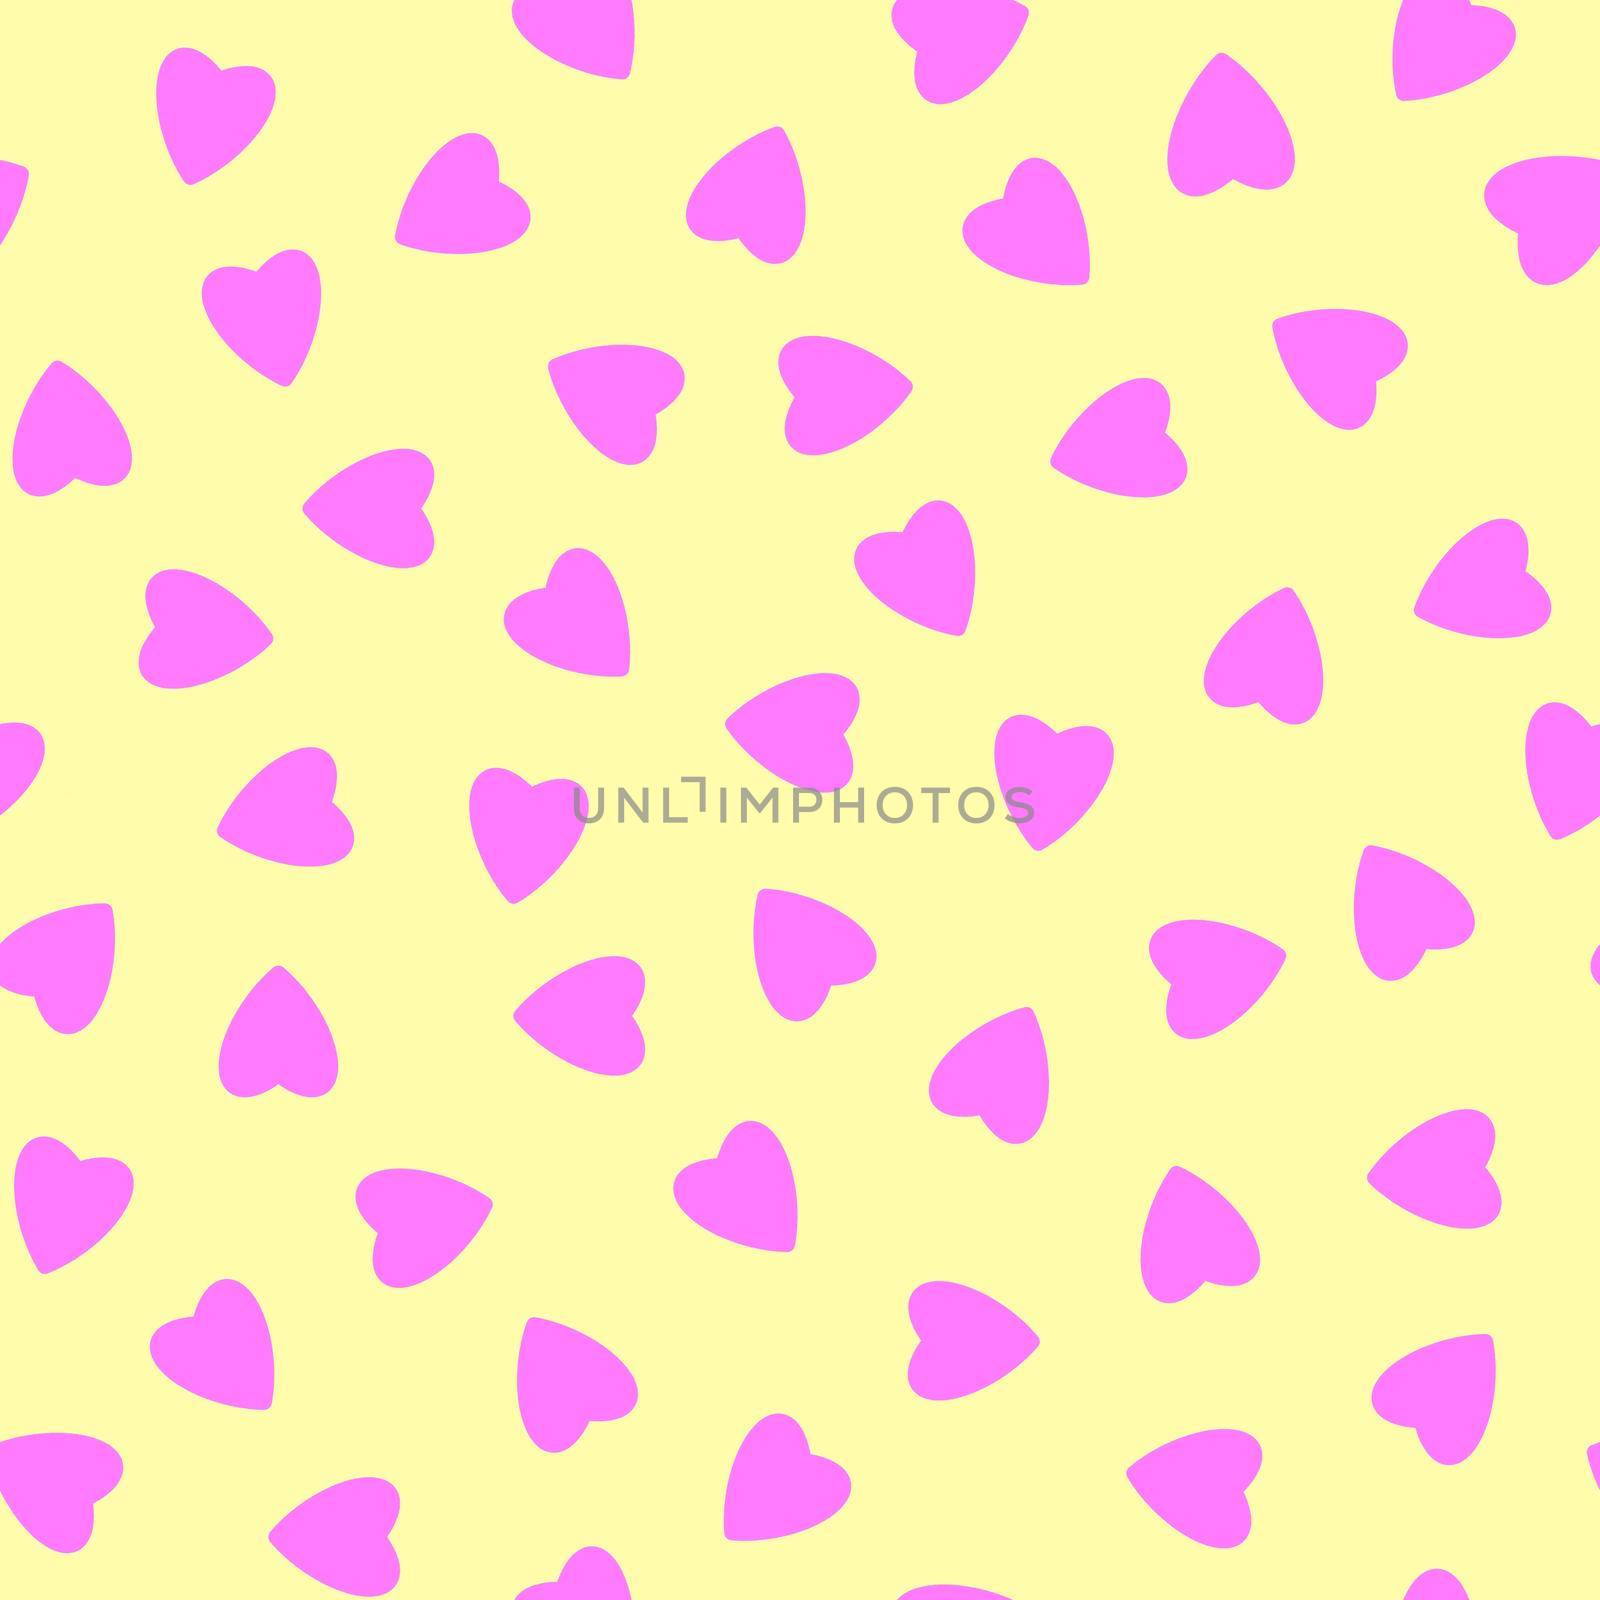 Simple hearts seamless pattern,endless chaotic texture made of tiny heart silhouettes.Valentines,mothers day background.Great for Easter,wedding,scrapbook,gift wrapping paper,textiles.Lilac on ivory by Angelsmoon